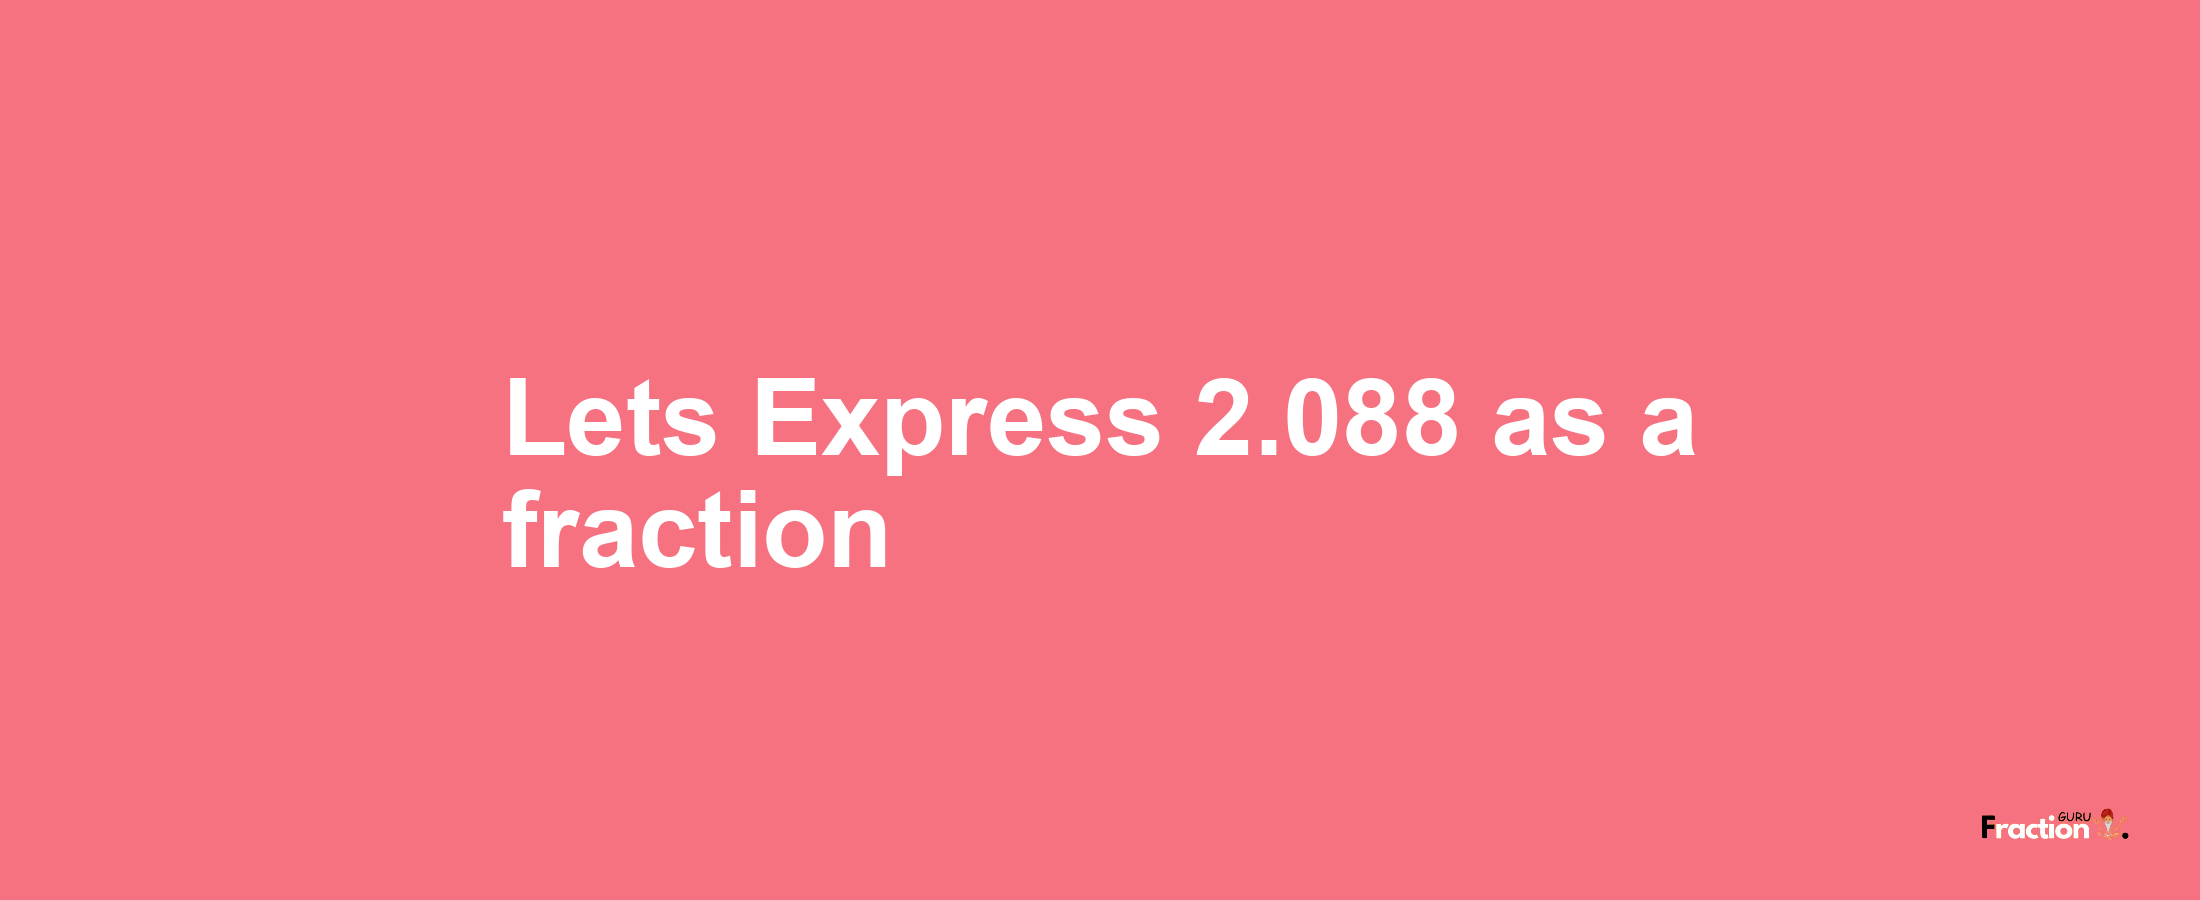 Lets Express 2.088 as afraction